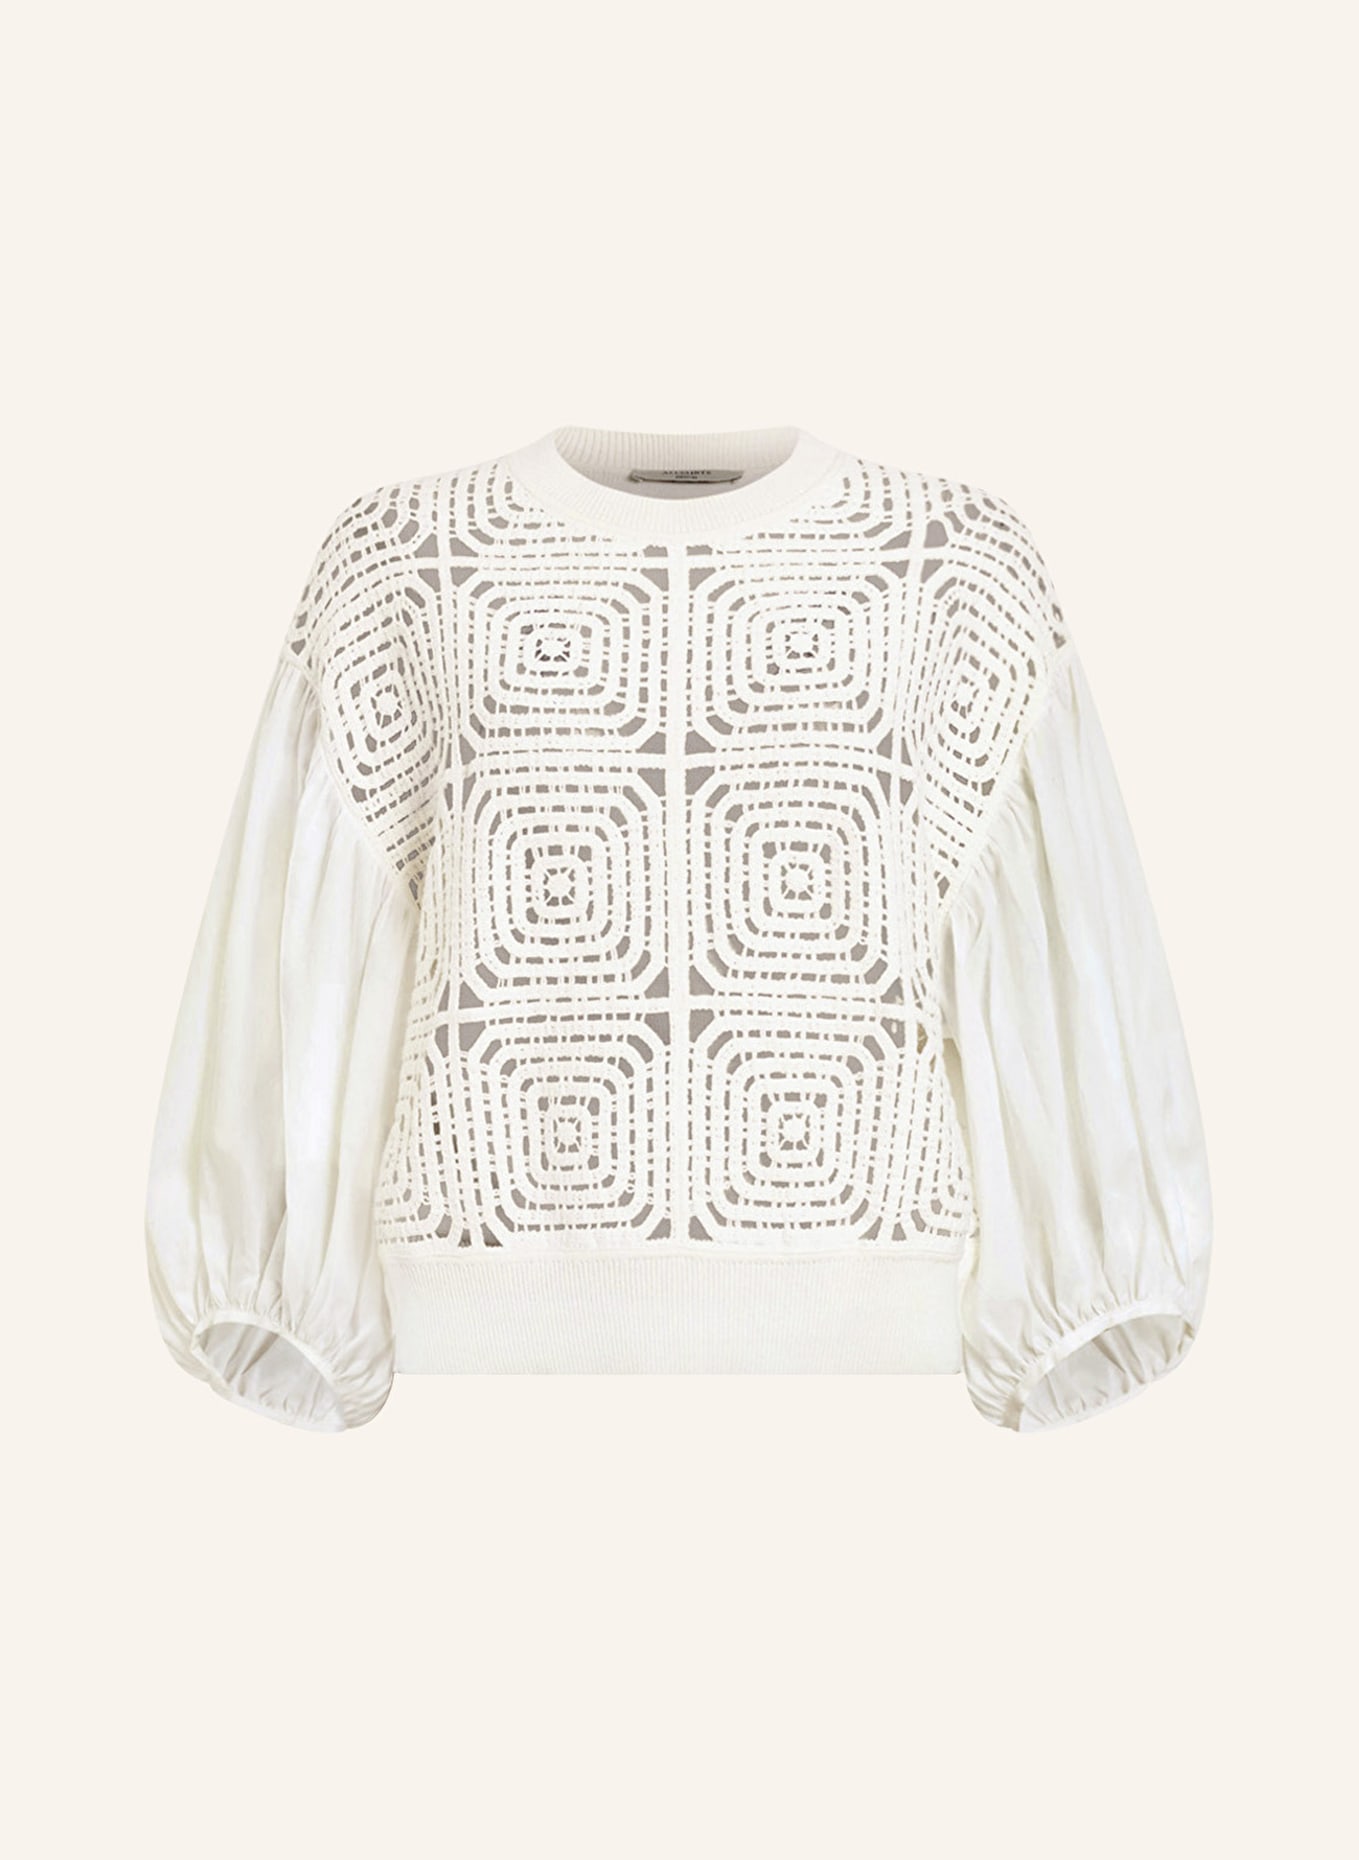 ALLSAINTS Sweater SOL in mixed materials with 3/4 sleeves, Color: WHITE (Image 1)